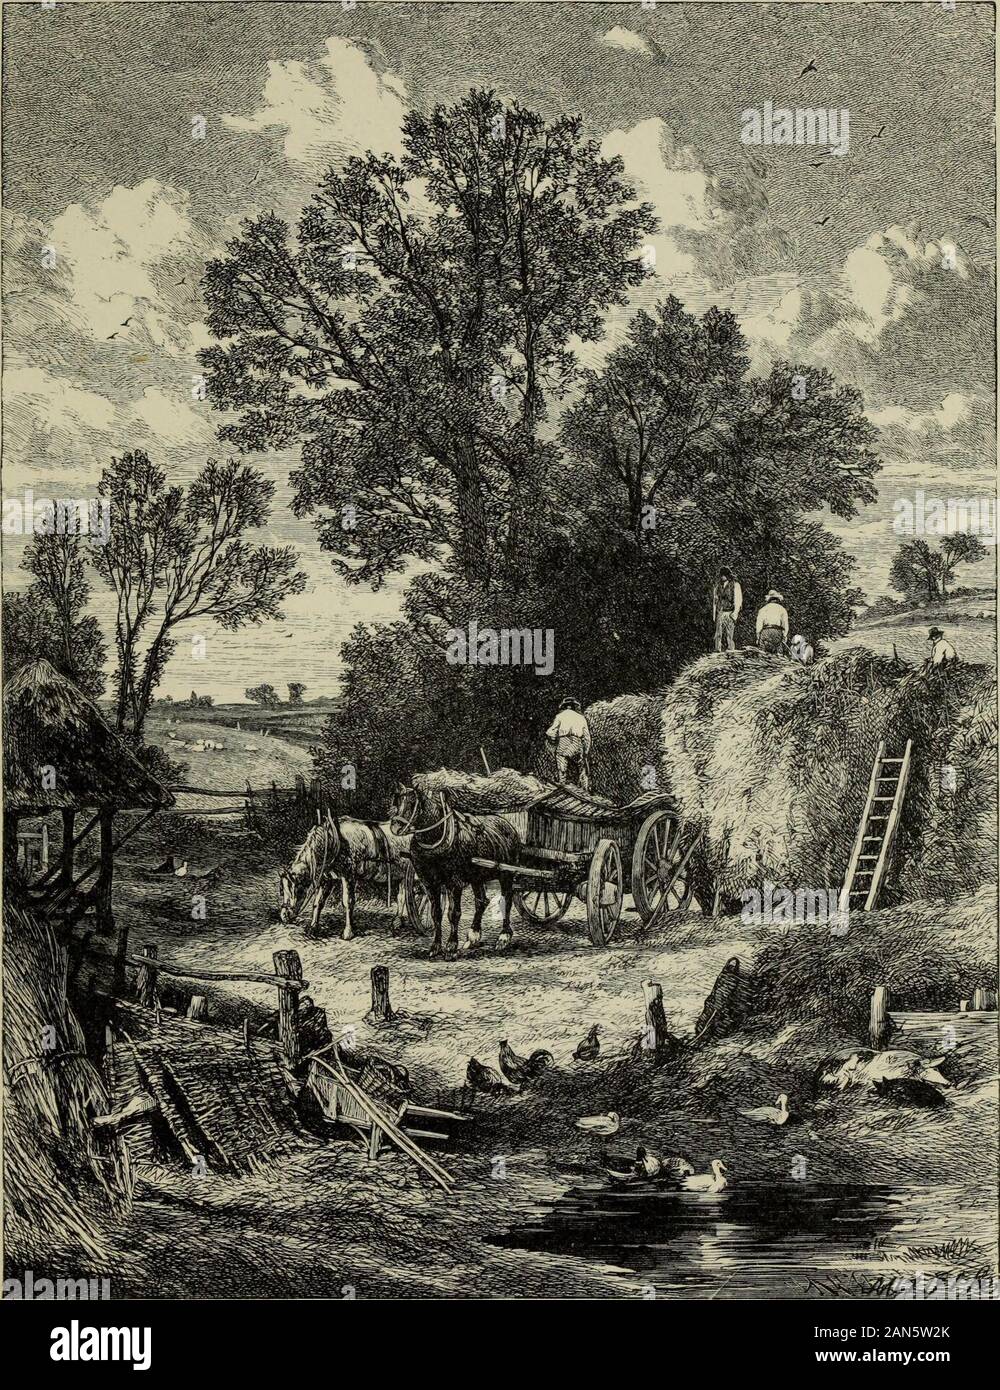 Birket Foster's pictures of English landscape . ty is but earthly, And  loosed from earth must die. Humbly grew the wheat-ears In their russet  weed,Now ripe and dry in sheaves they lie,